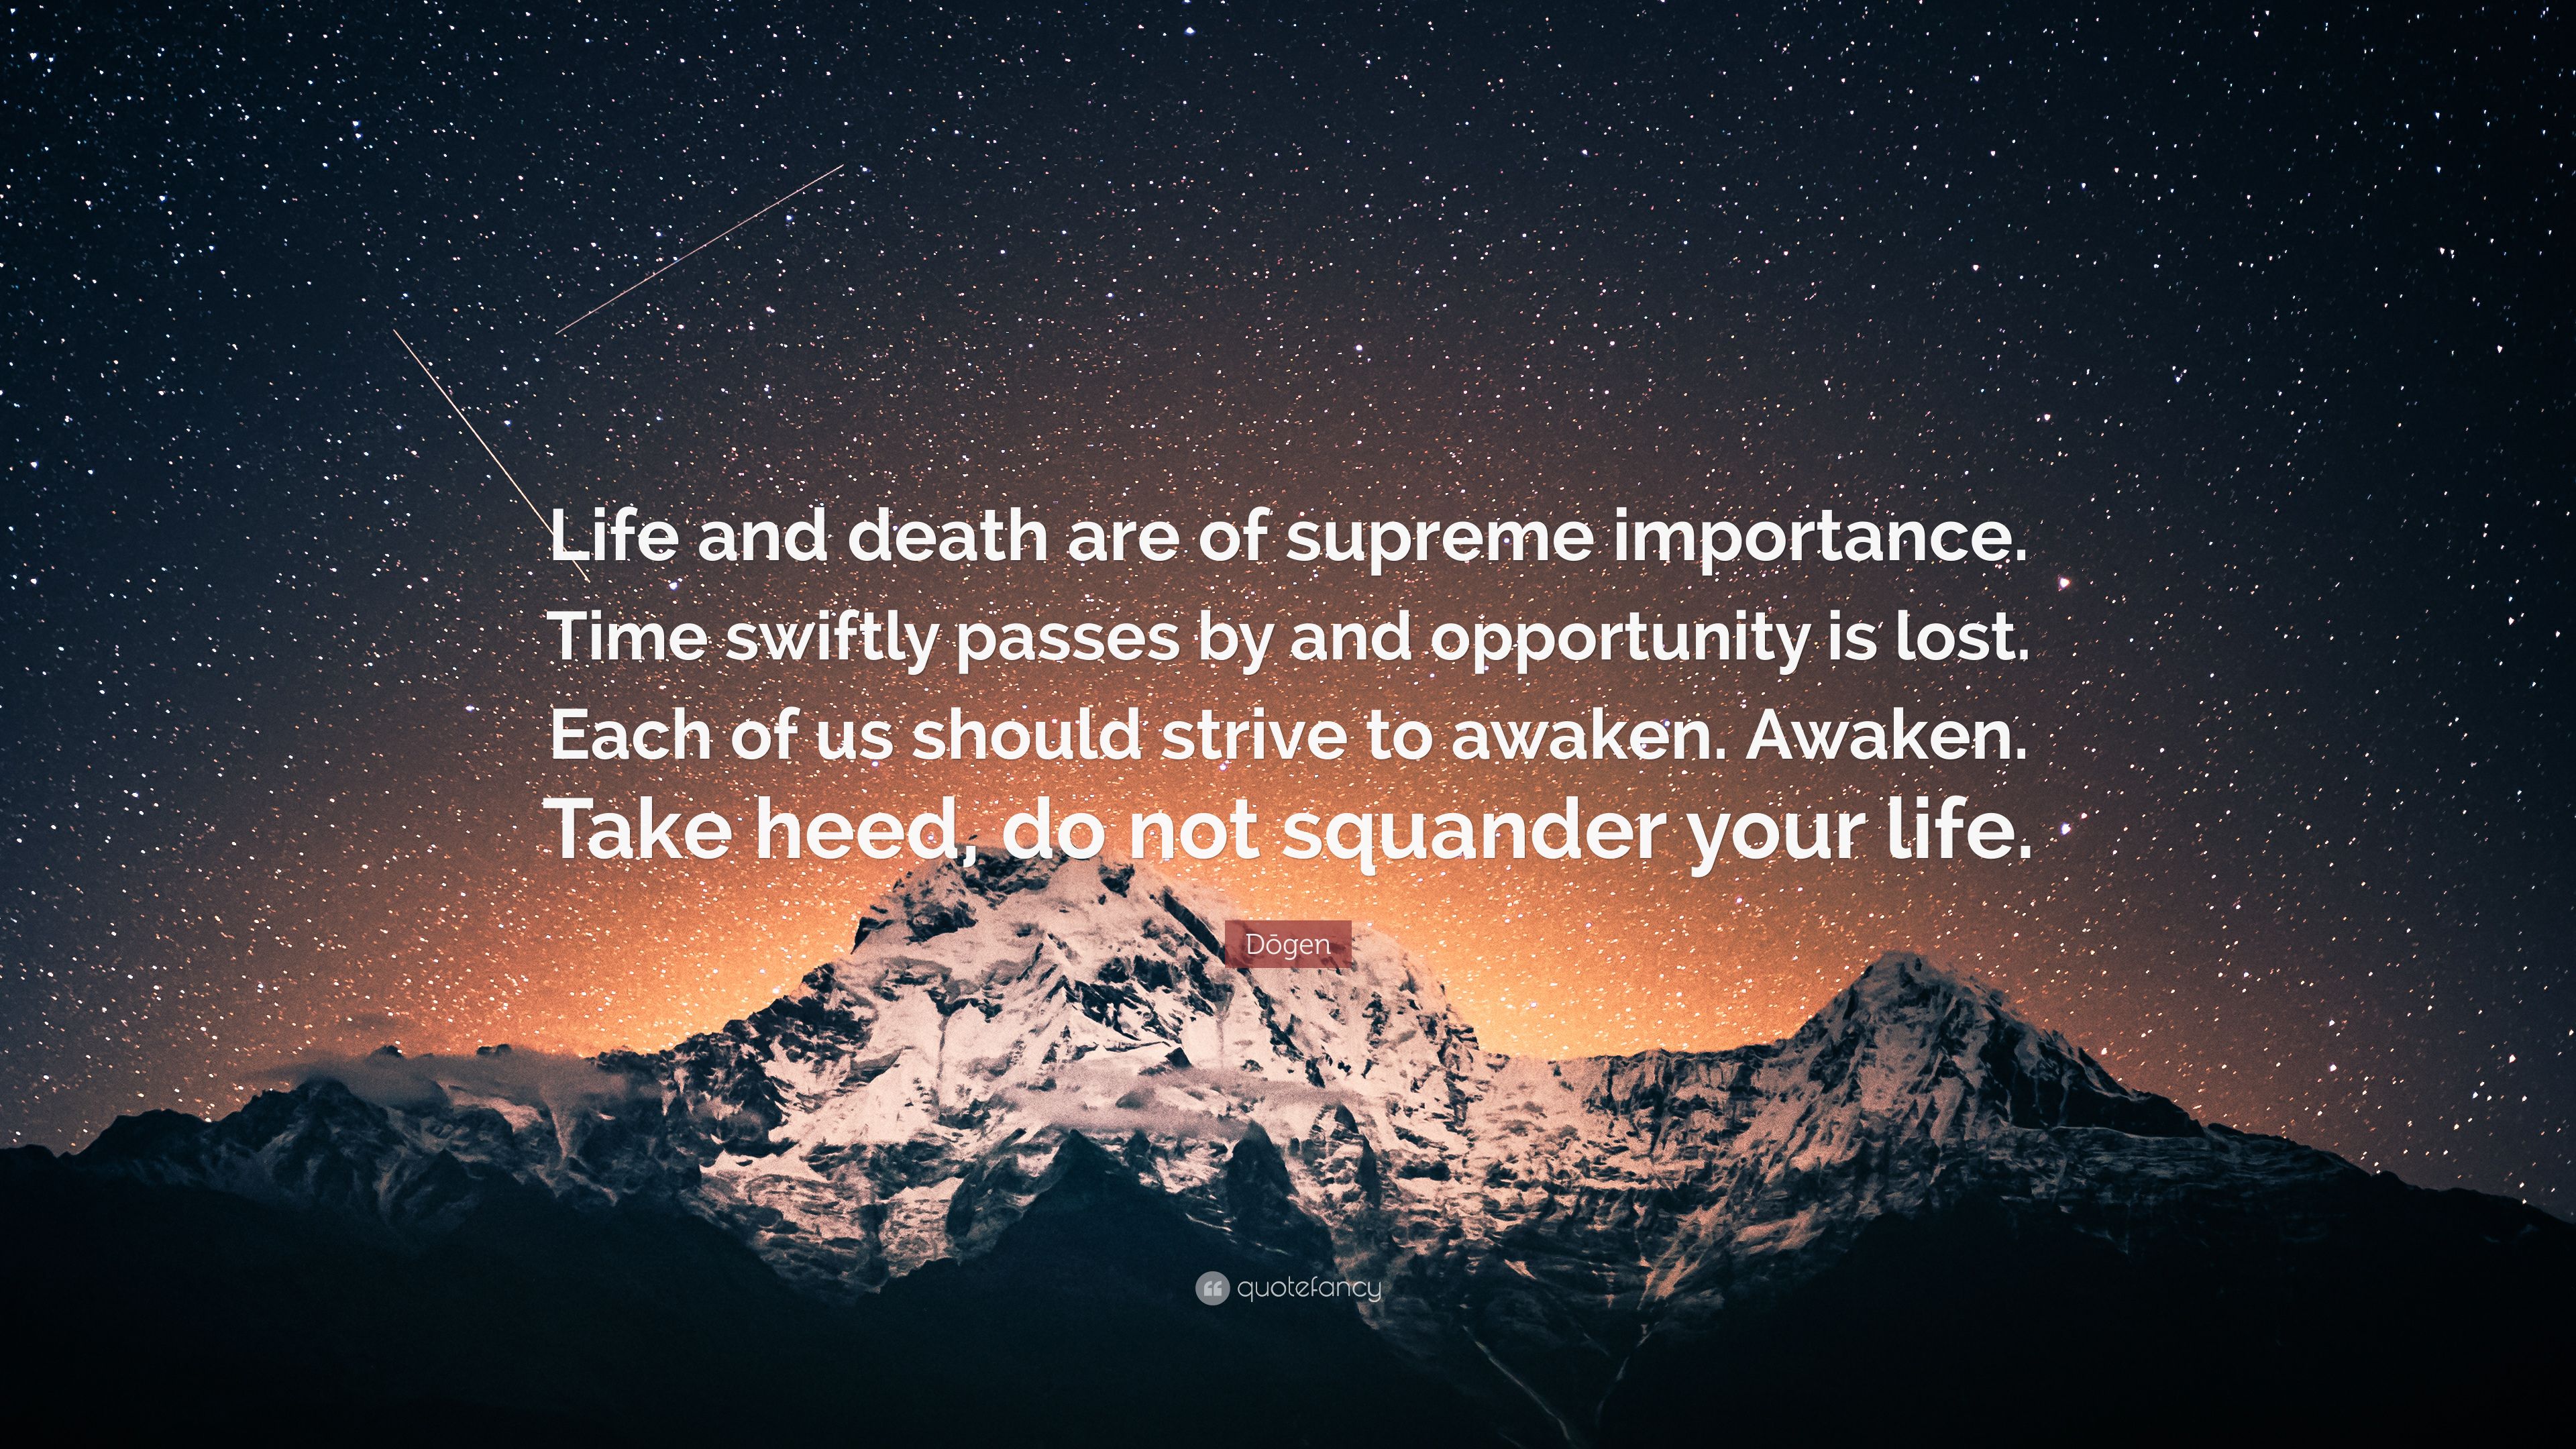 Dōgen Quote: “Life and death are of supreme importance. Time swiftly passes by and opportunity is lost. Each of us should strive to aw.” (7 wallpaper)